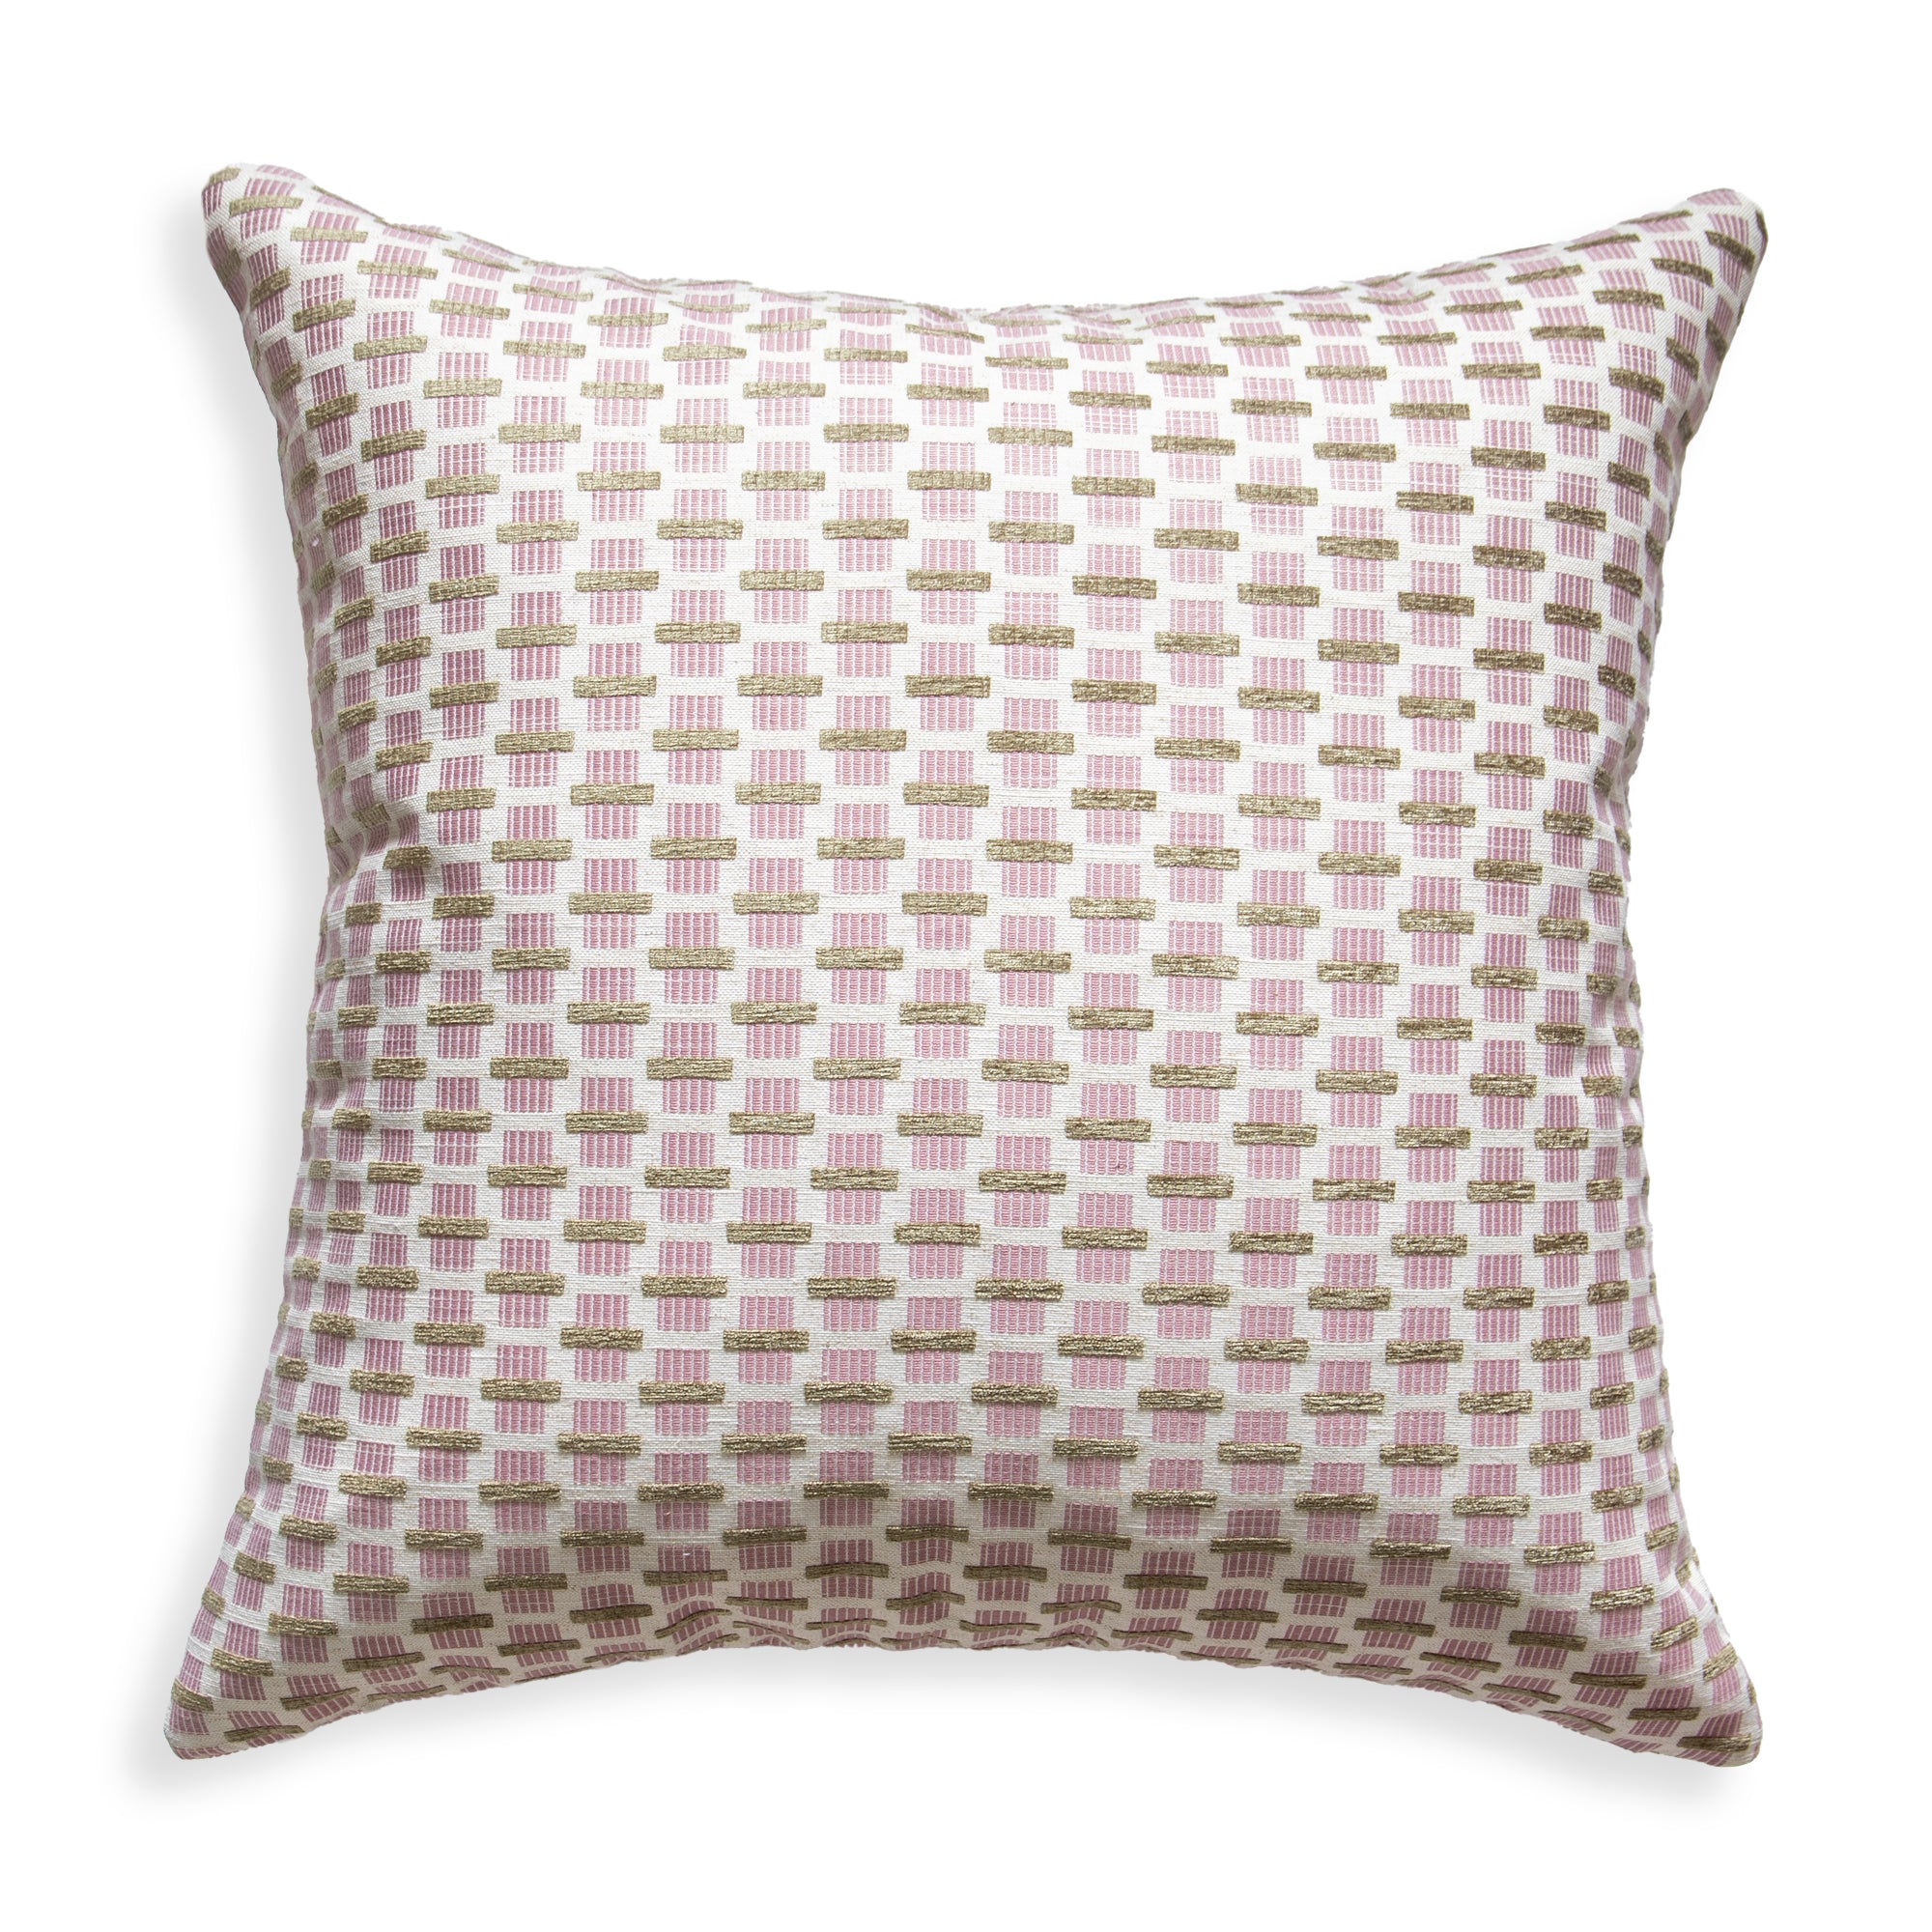  chenille and woven jacquard pink and citron geometric pillow